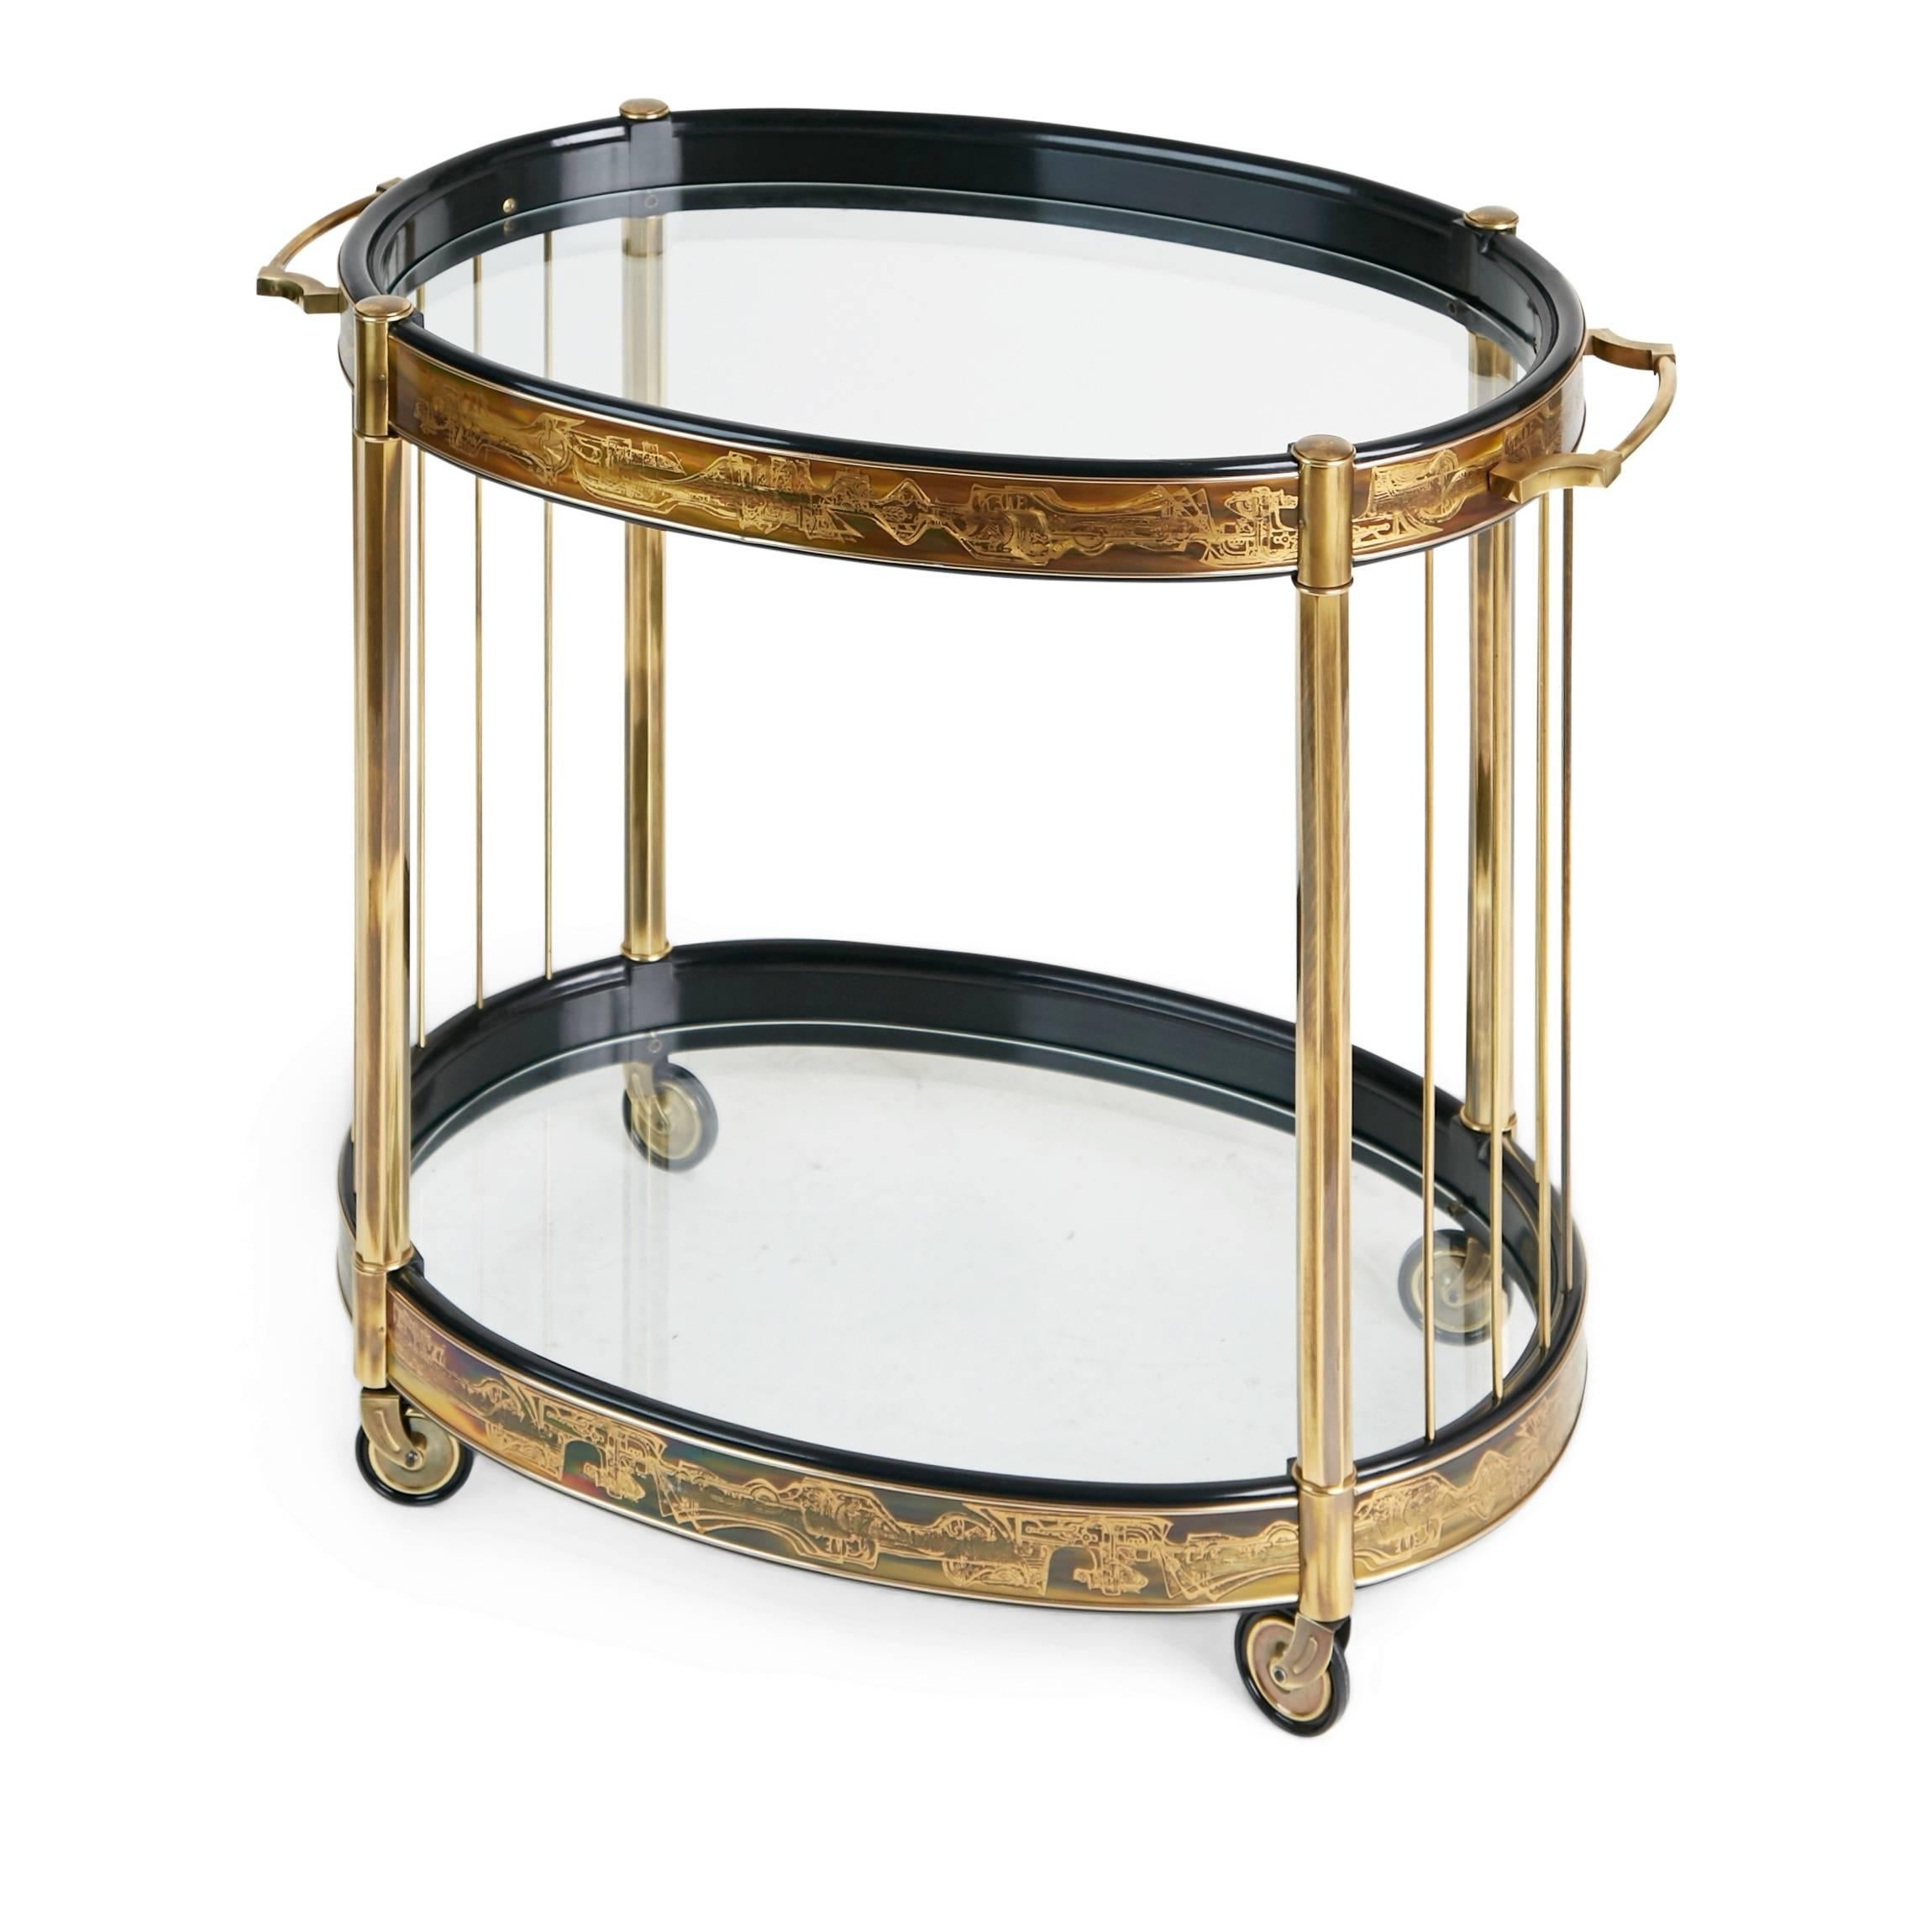 Exquisitely executed oval bar cart by Bernhard Rohne for Mastercraft. Featuring black lacquered and acid etched wrapped brass panels displaying an abstract freeform design. The cart has gleaming brass legs and polished brass rods that support the